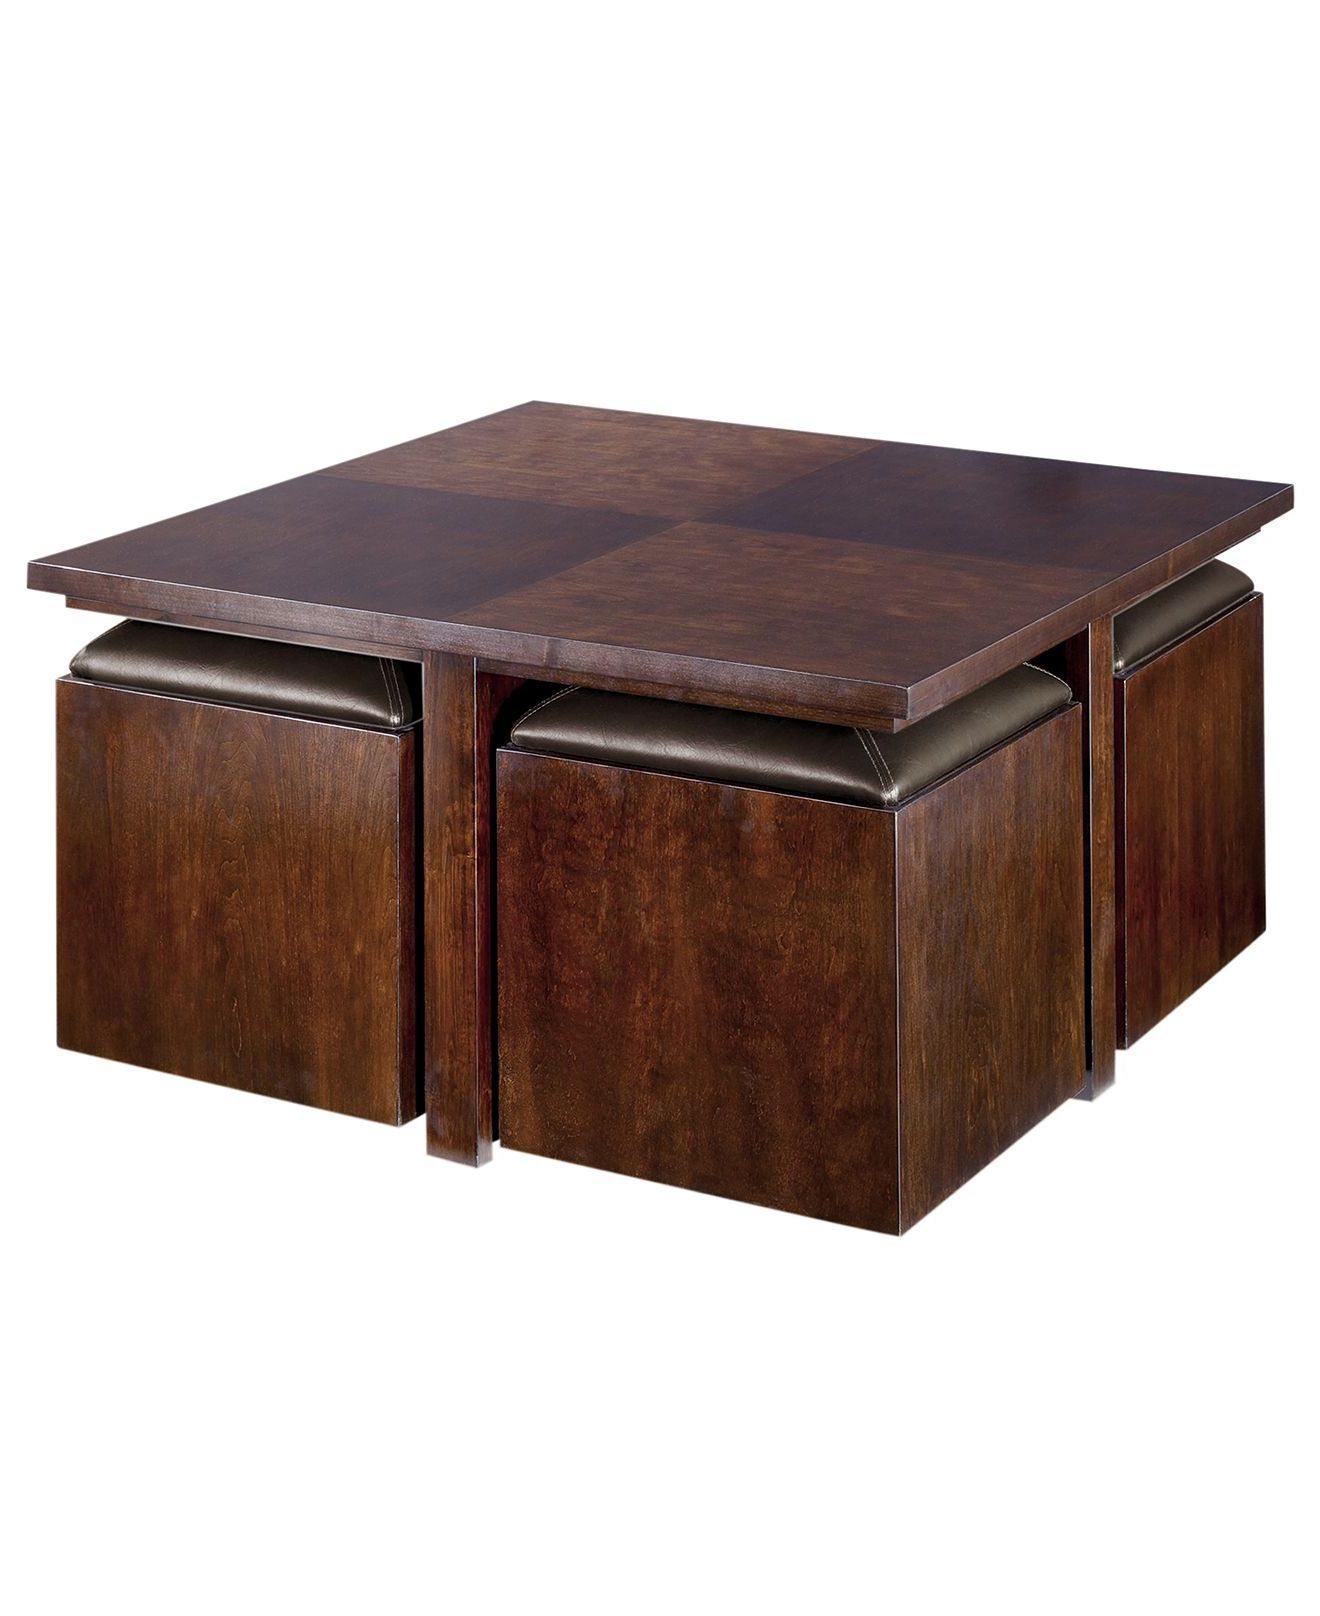 Well Known Hassch Modern Square Cocktail Tables Throughout Pelham Square Cocktail Table With Four Storage Cubes – Shop All Living (View 15 of 15)